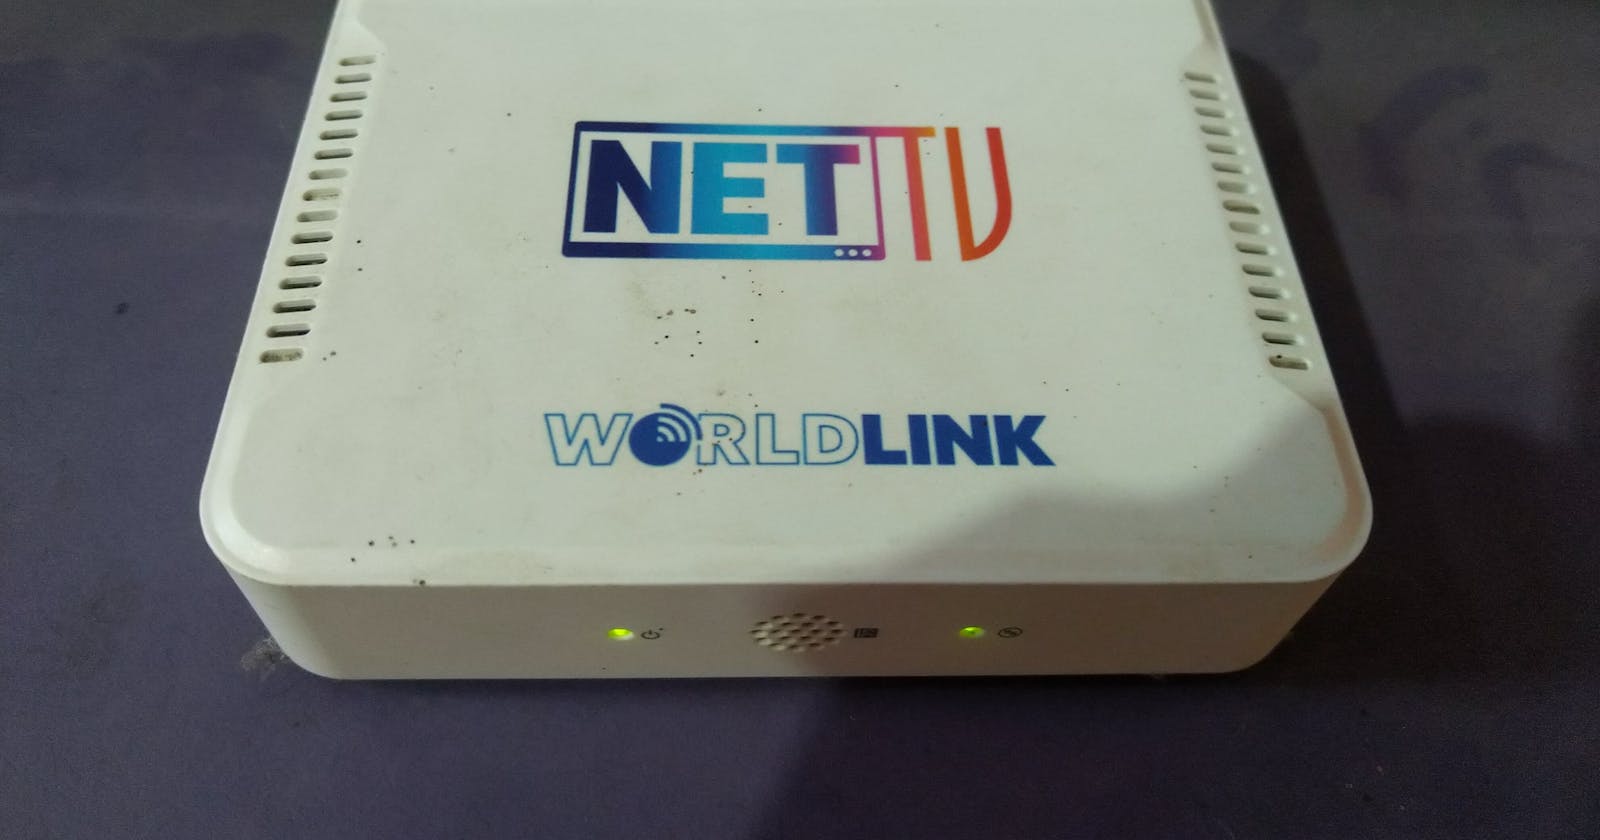 Getting shell access on NETTV's Android Setup Box using the UART interface